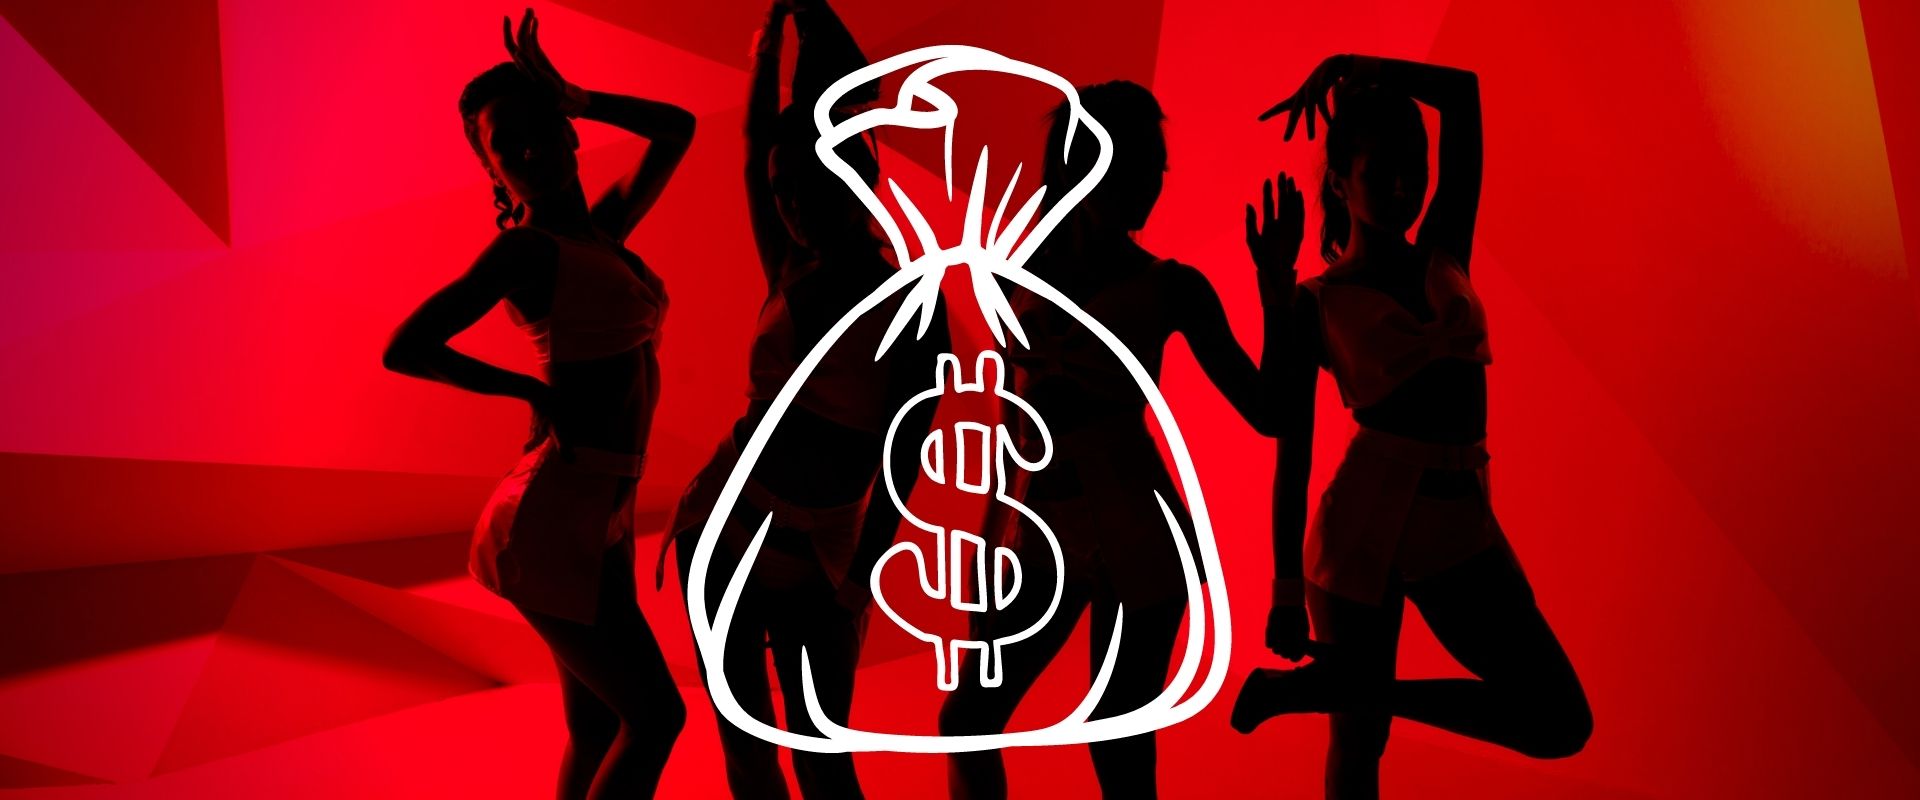 100 Ways To Make Money Sexually Online (Without Showing Your Face) pic